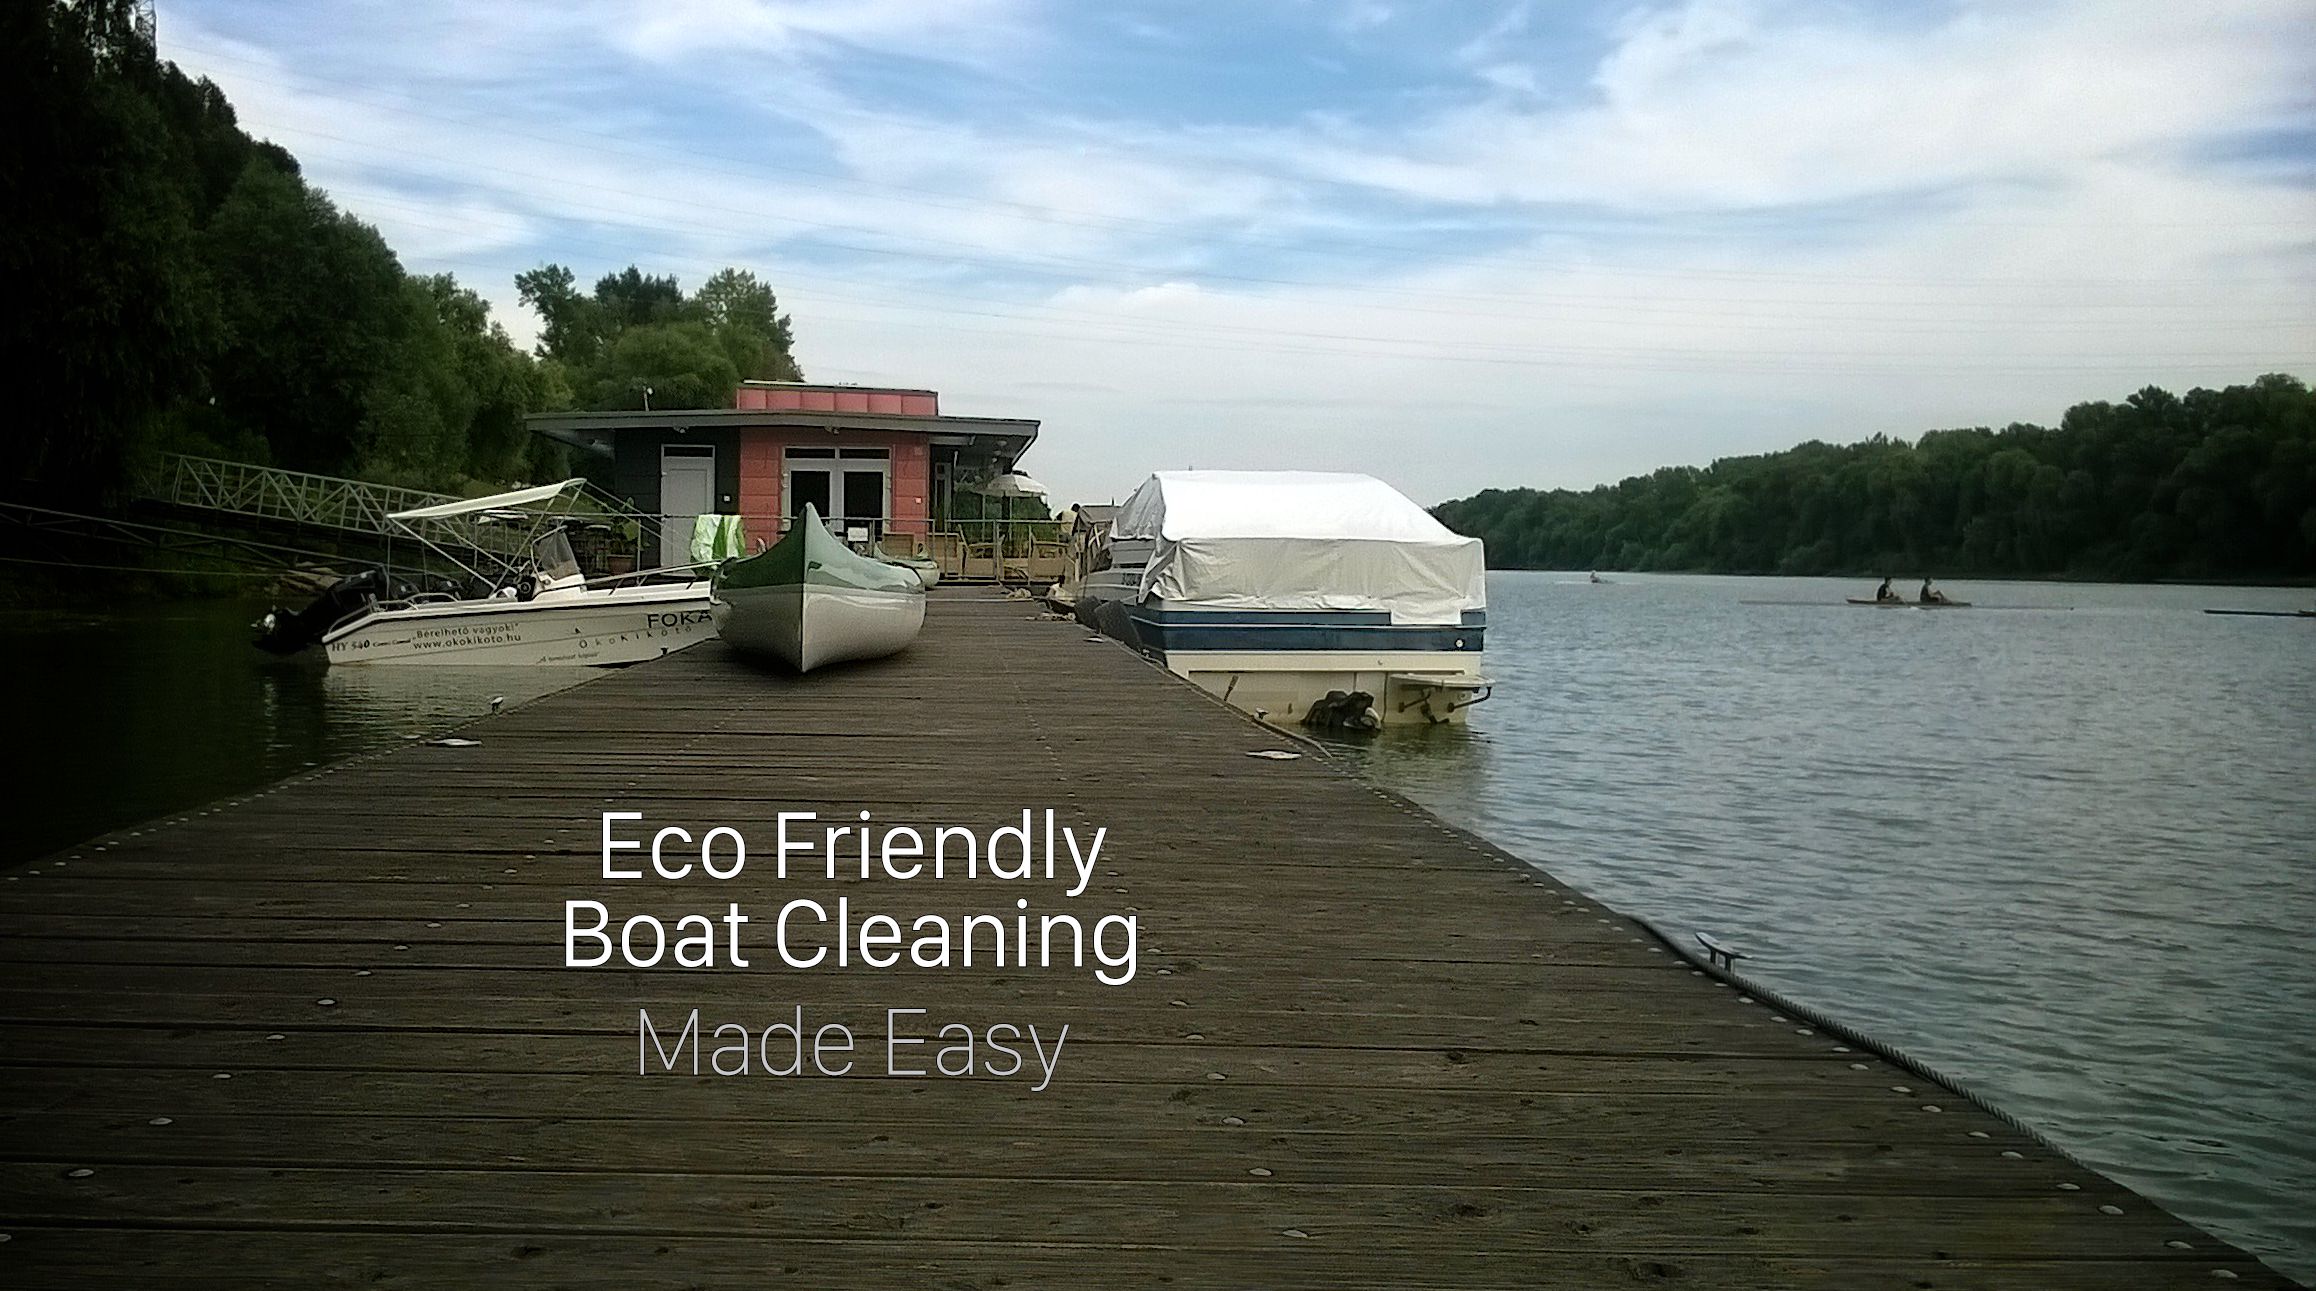 Eco Friendly Boat Cleaning